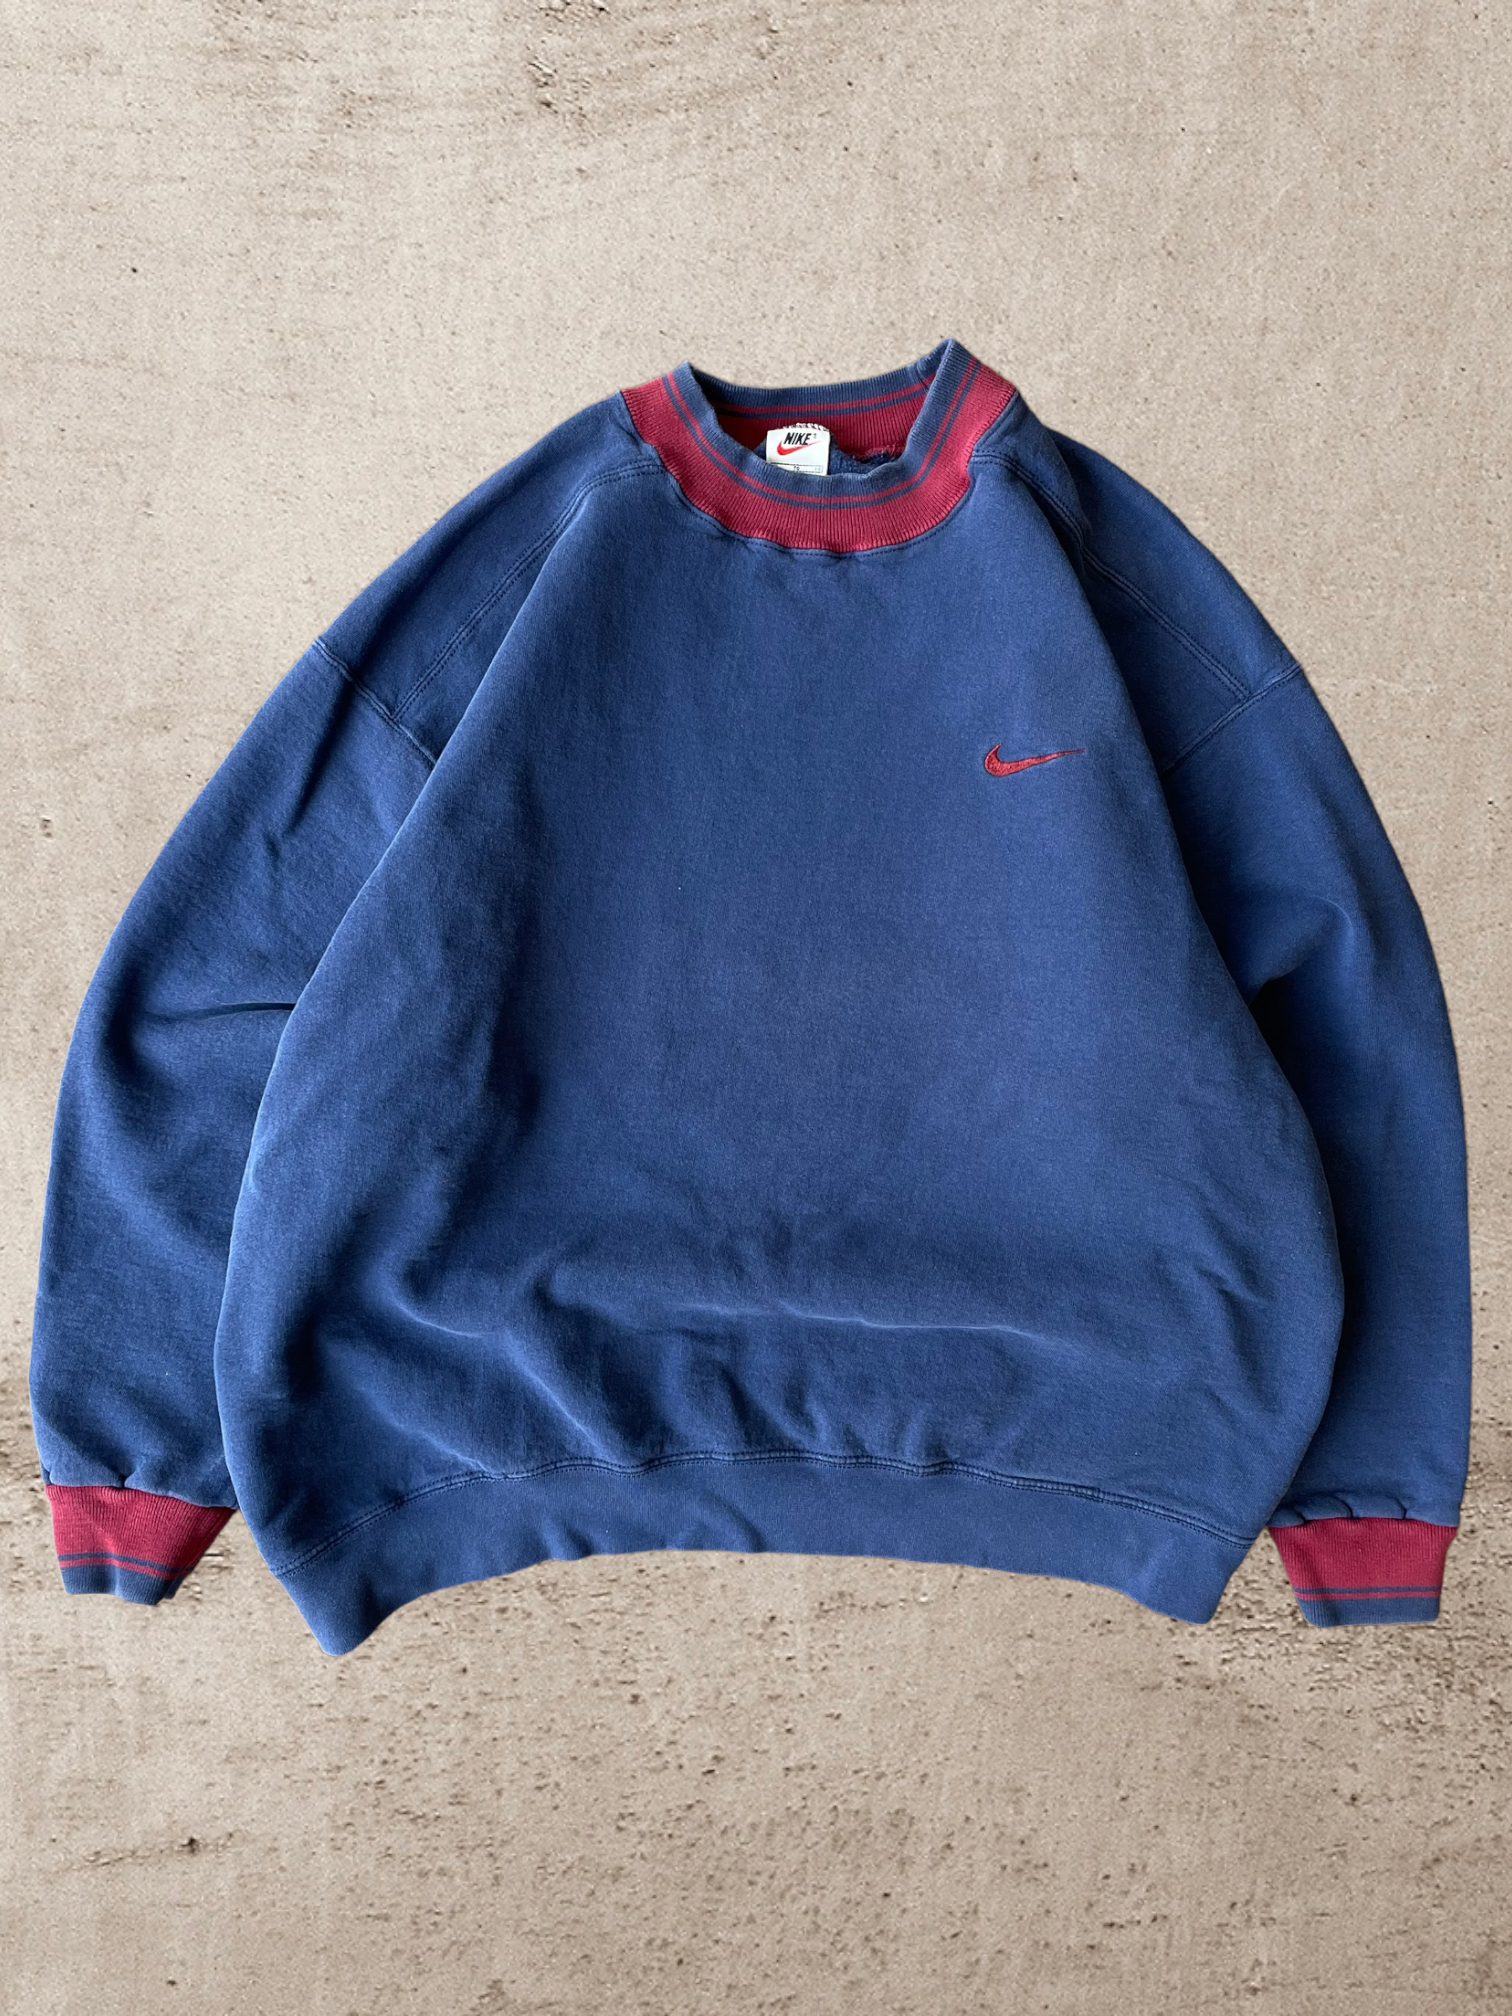 90s Nike Embroidered Crewneck - X-Large